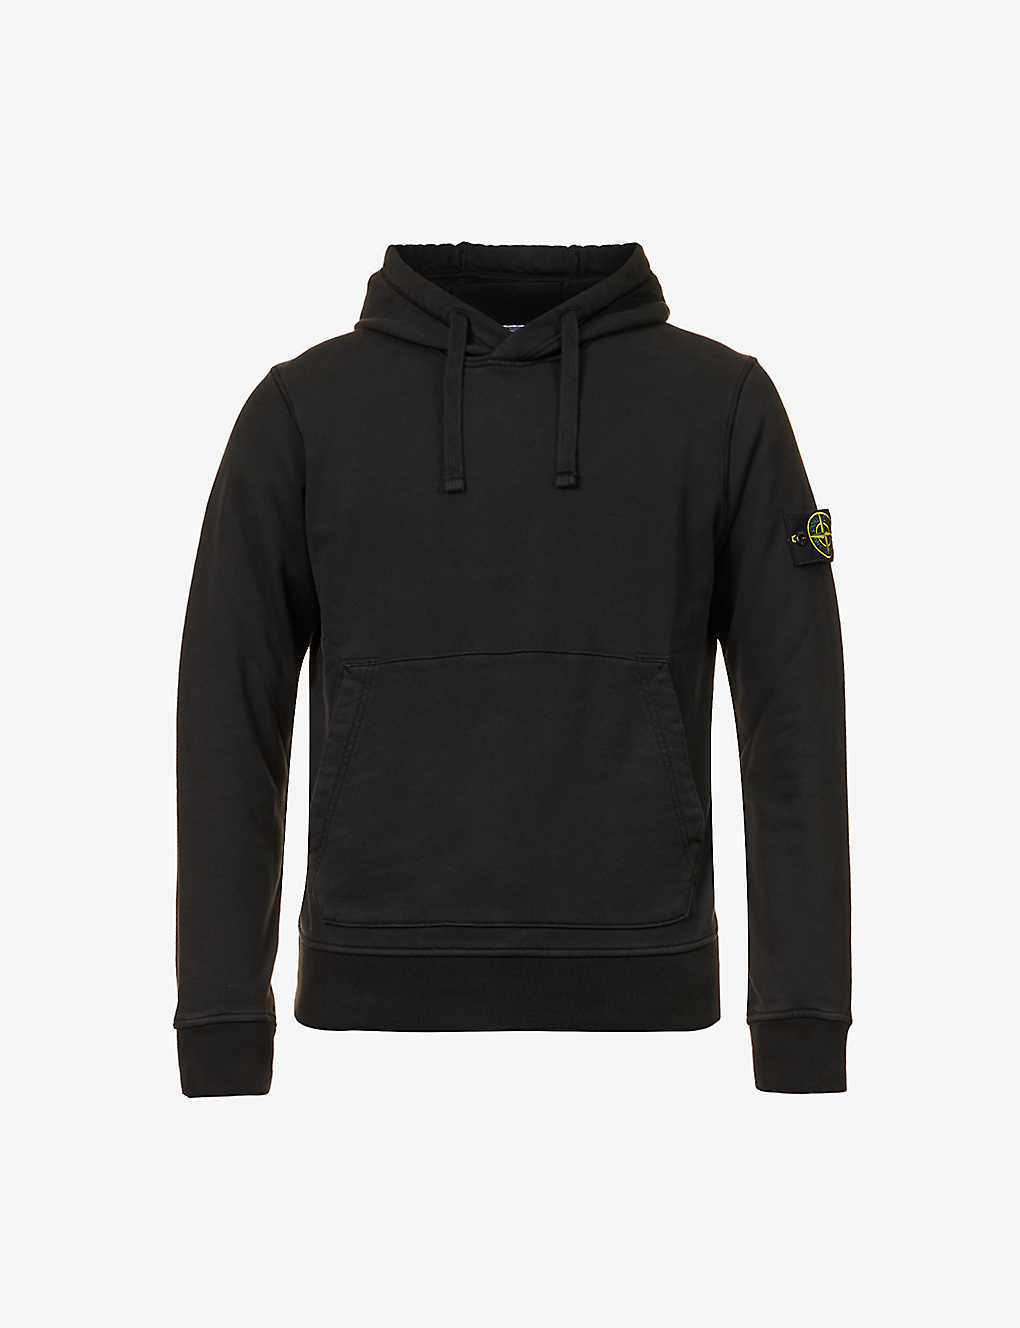 STONE ISLAND STONE ISLAND MEN'S BLACK BRAND-BADGE RELAXED-FIT COTTON-JERSEY HOODY,65433219